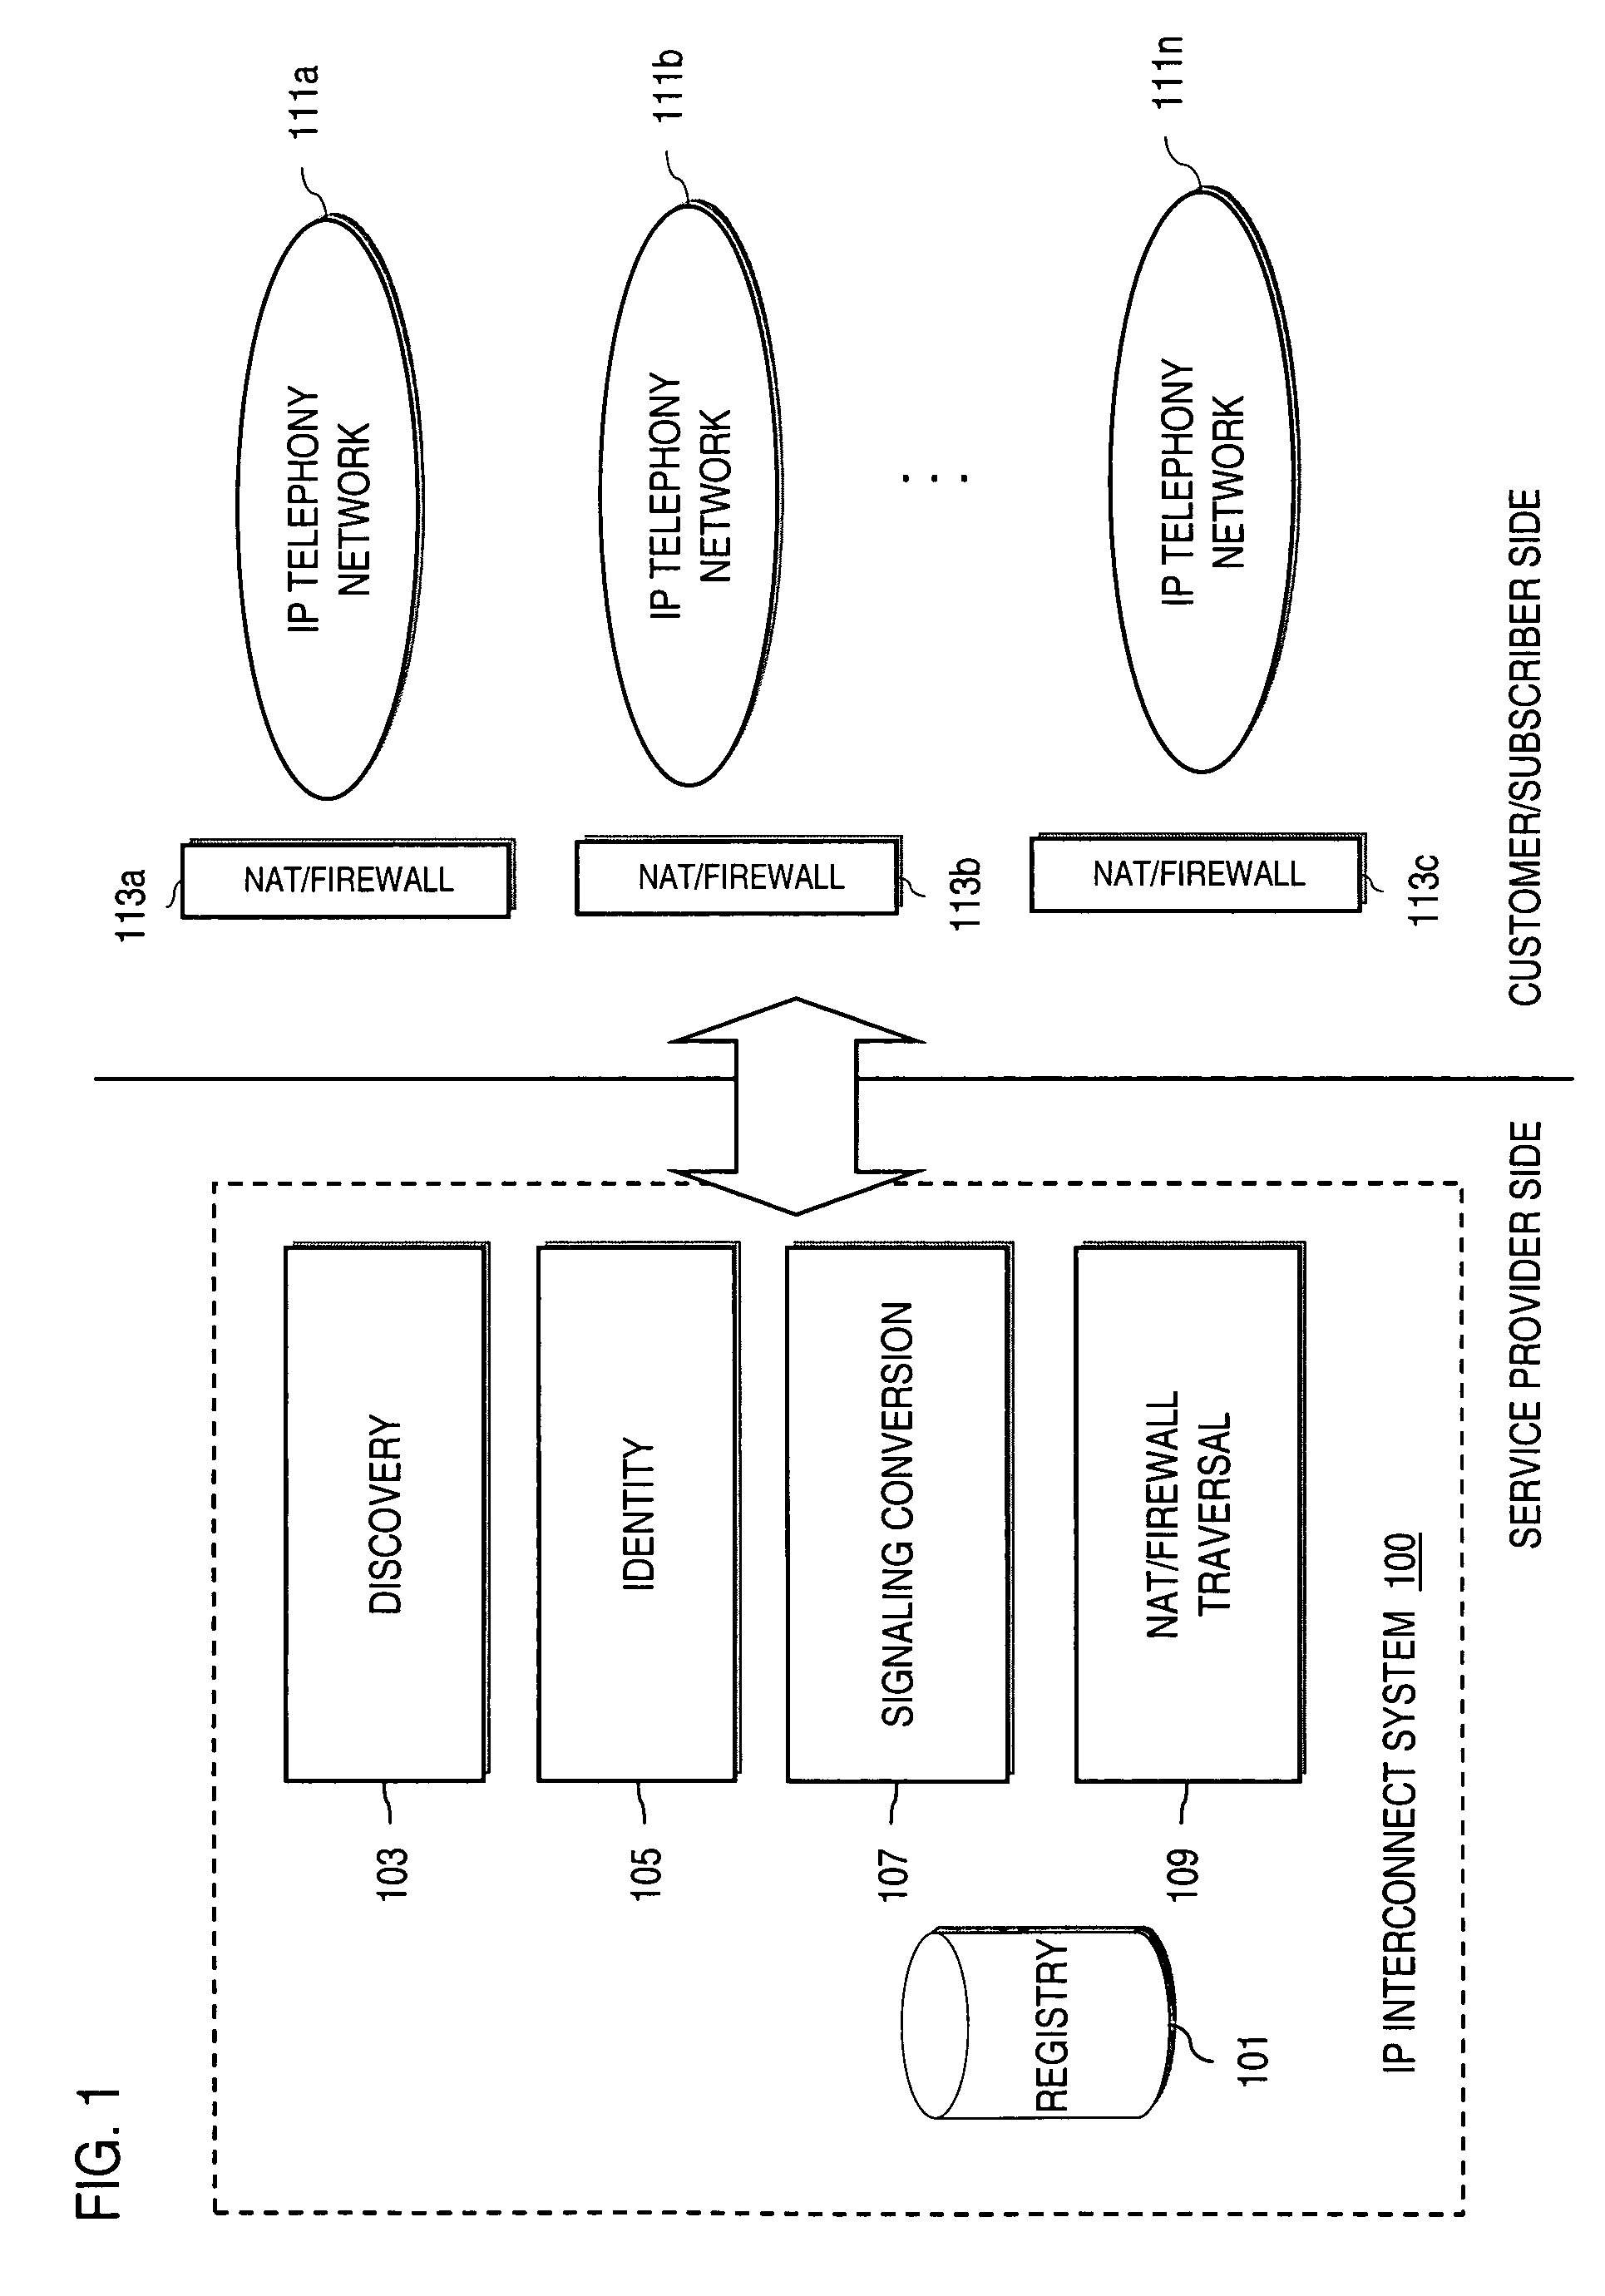 Method and system for providing secure credential storage to support interdomain traversal